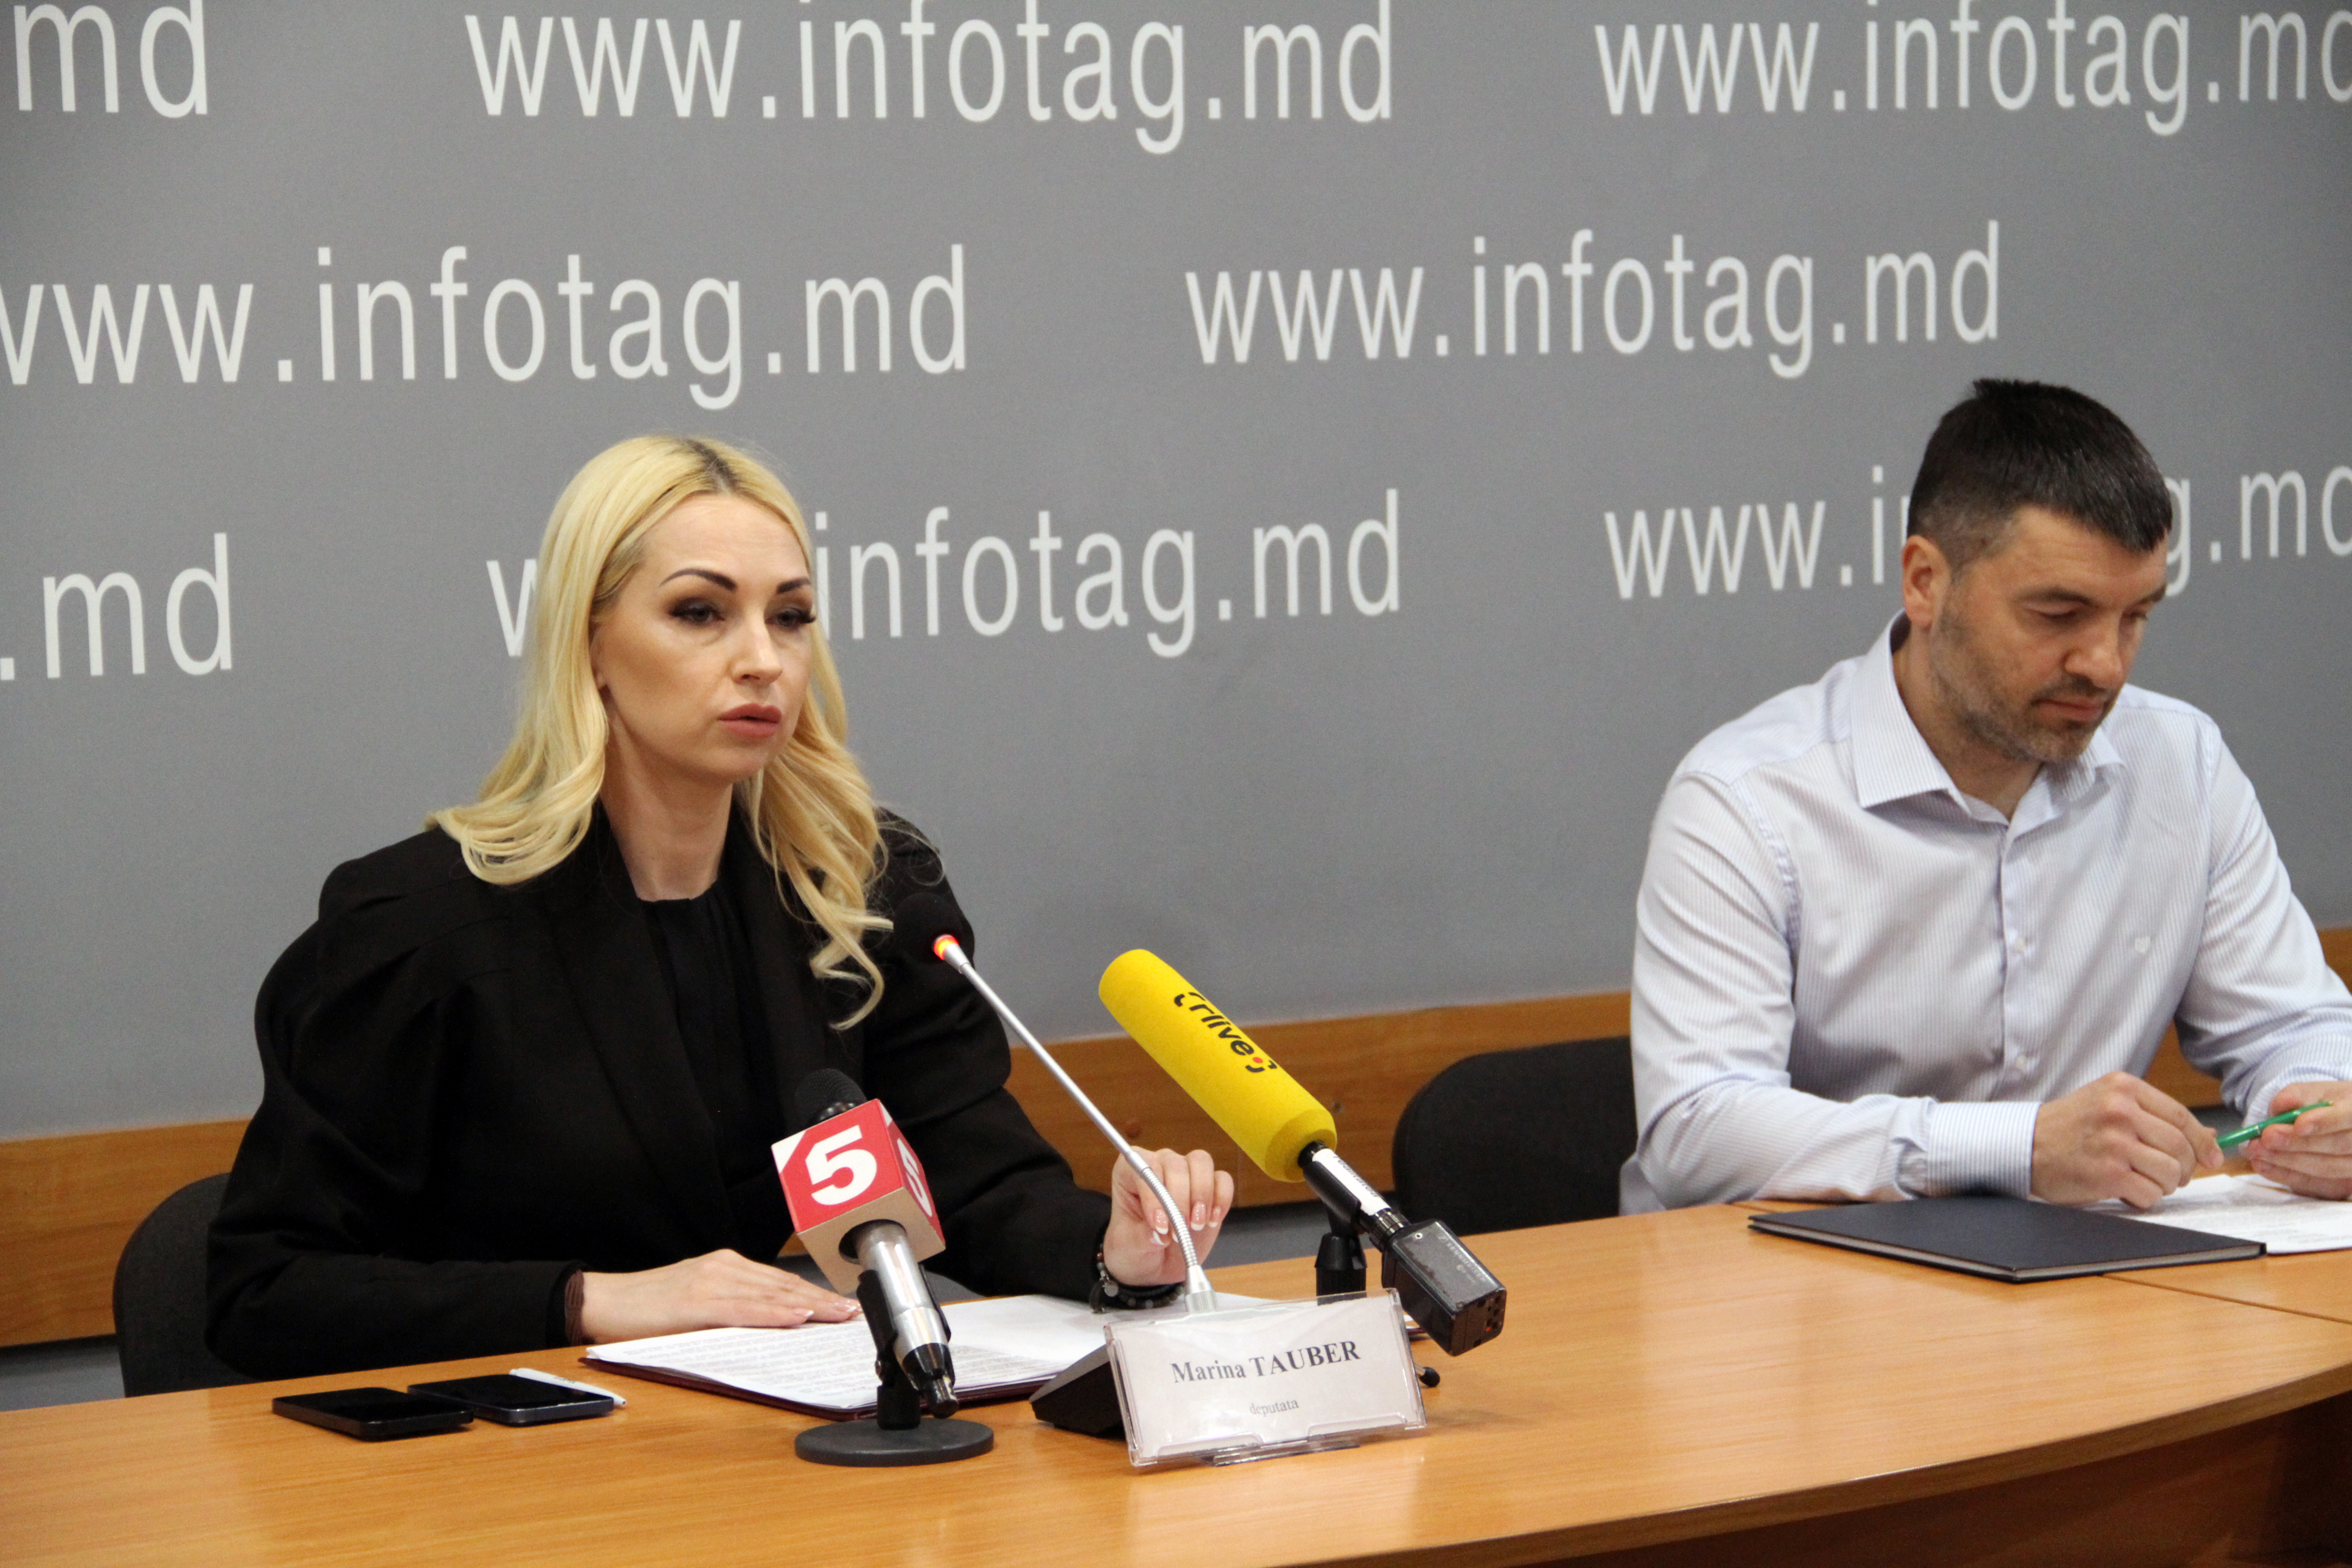 MARINA TAUBER BELIEVES THAT AUTHORITIES INTEND TO DEPRIVE HER OF HER DEPUTY MANDATE USING THE GENERAL PROSECUTOR